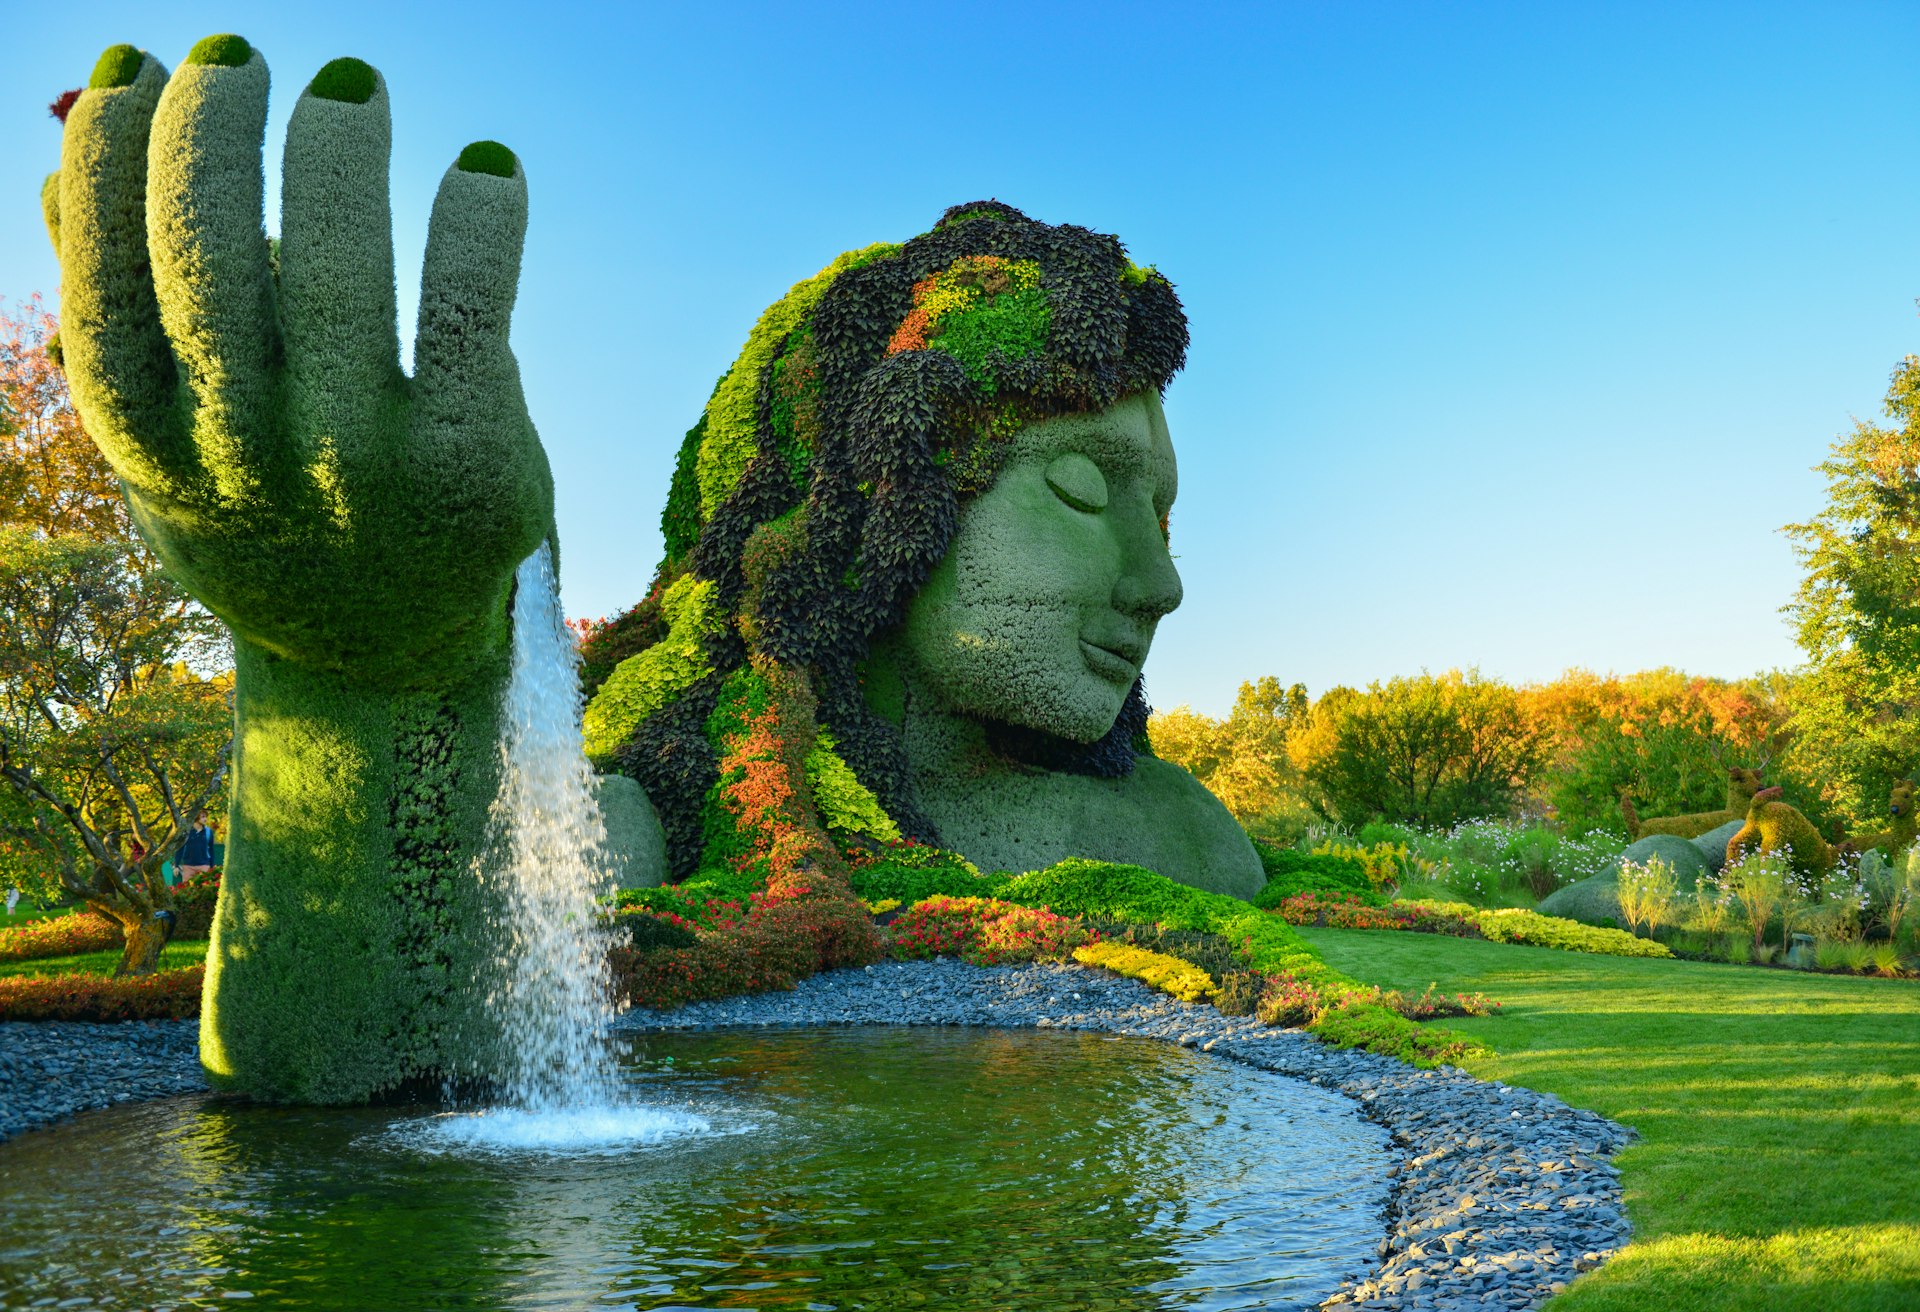 A giant woman with her hand in the air made entirely of shrubs, leaves, bushes and trees on show at the Montreal botanical garden